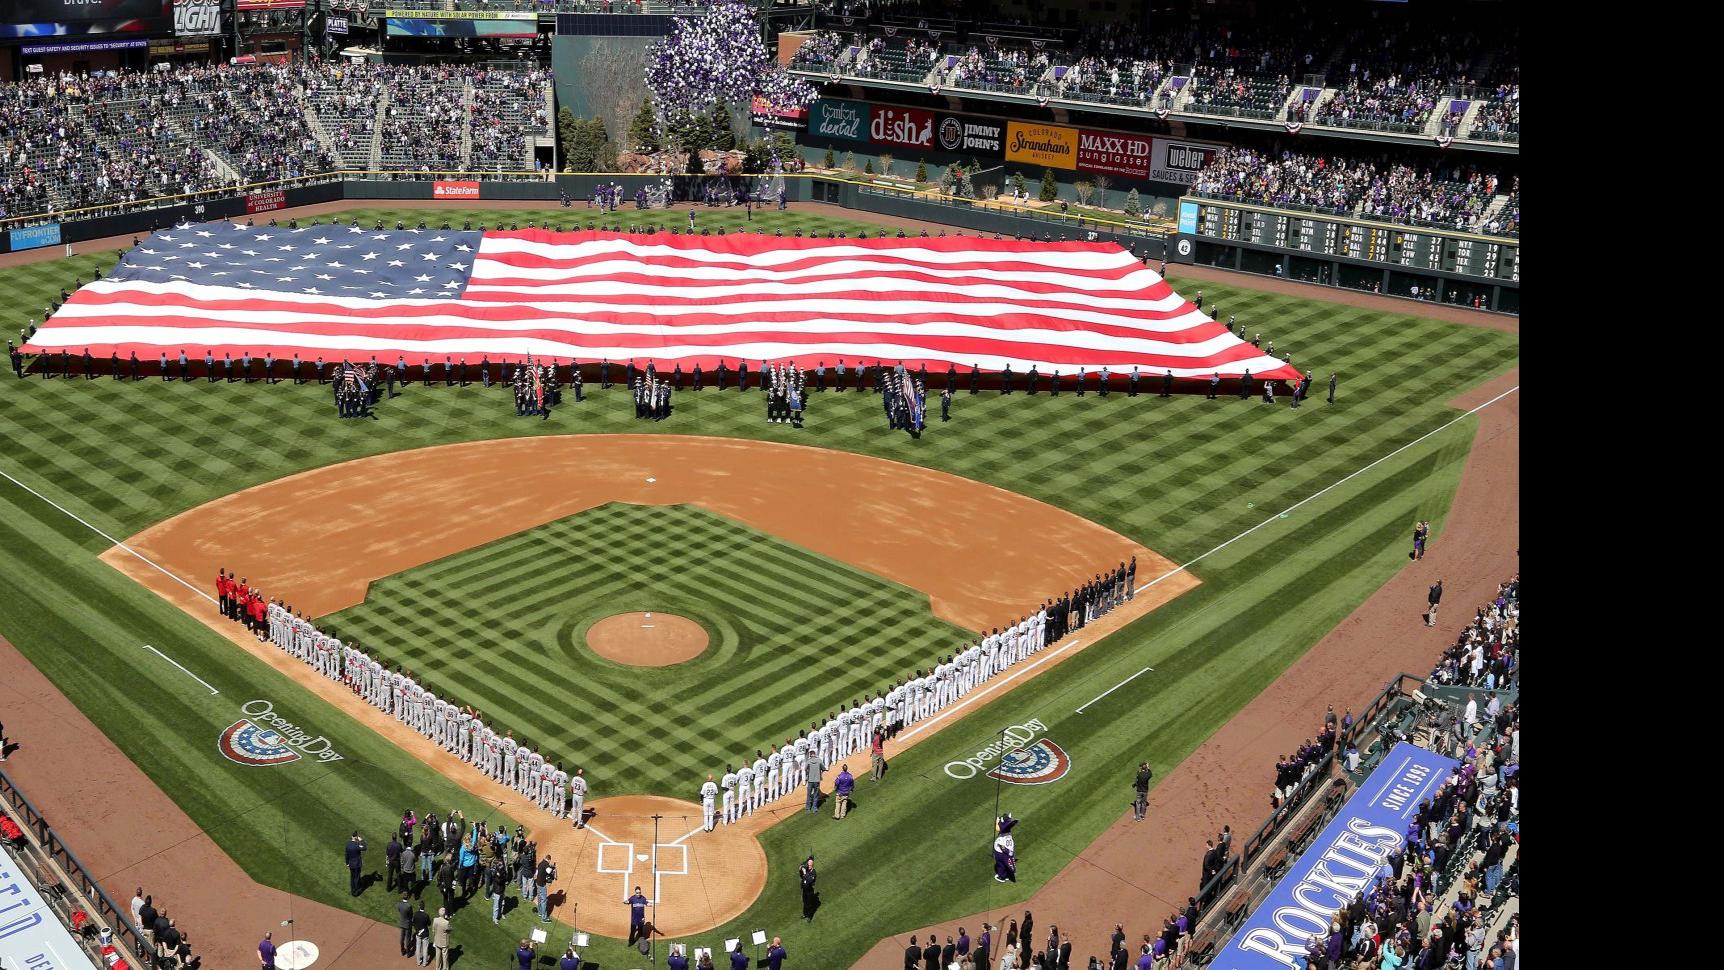 Rockies raise outfield walls at Coors Field in two spots